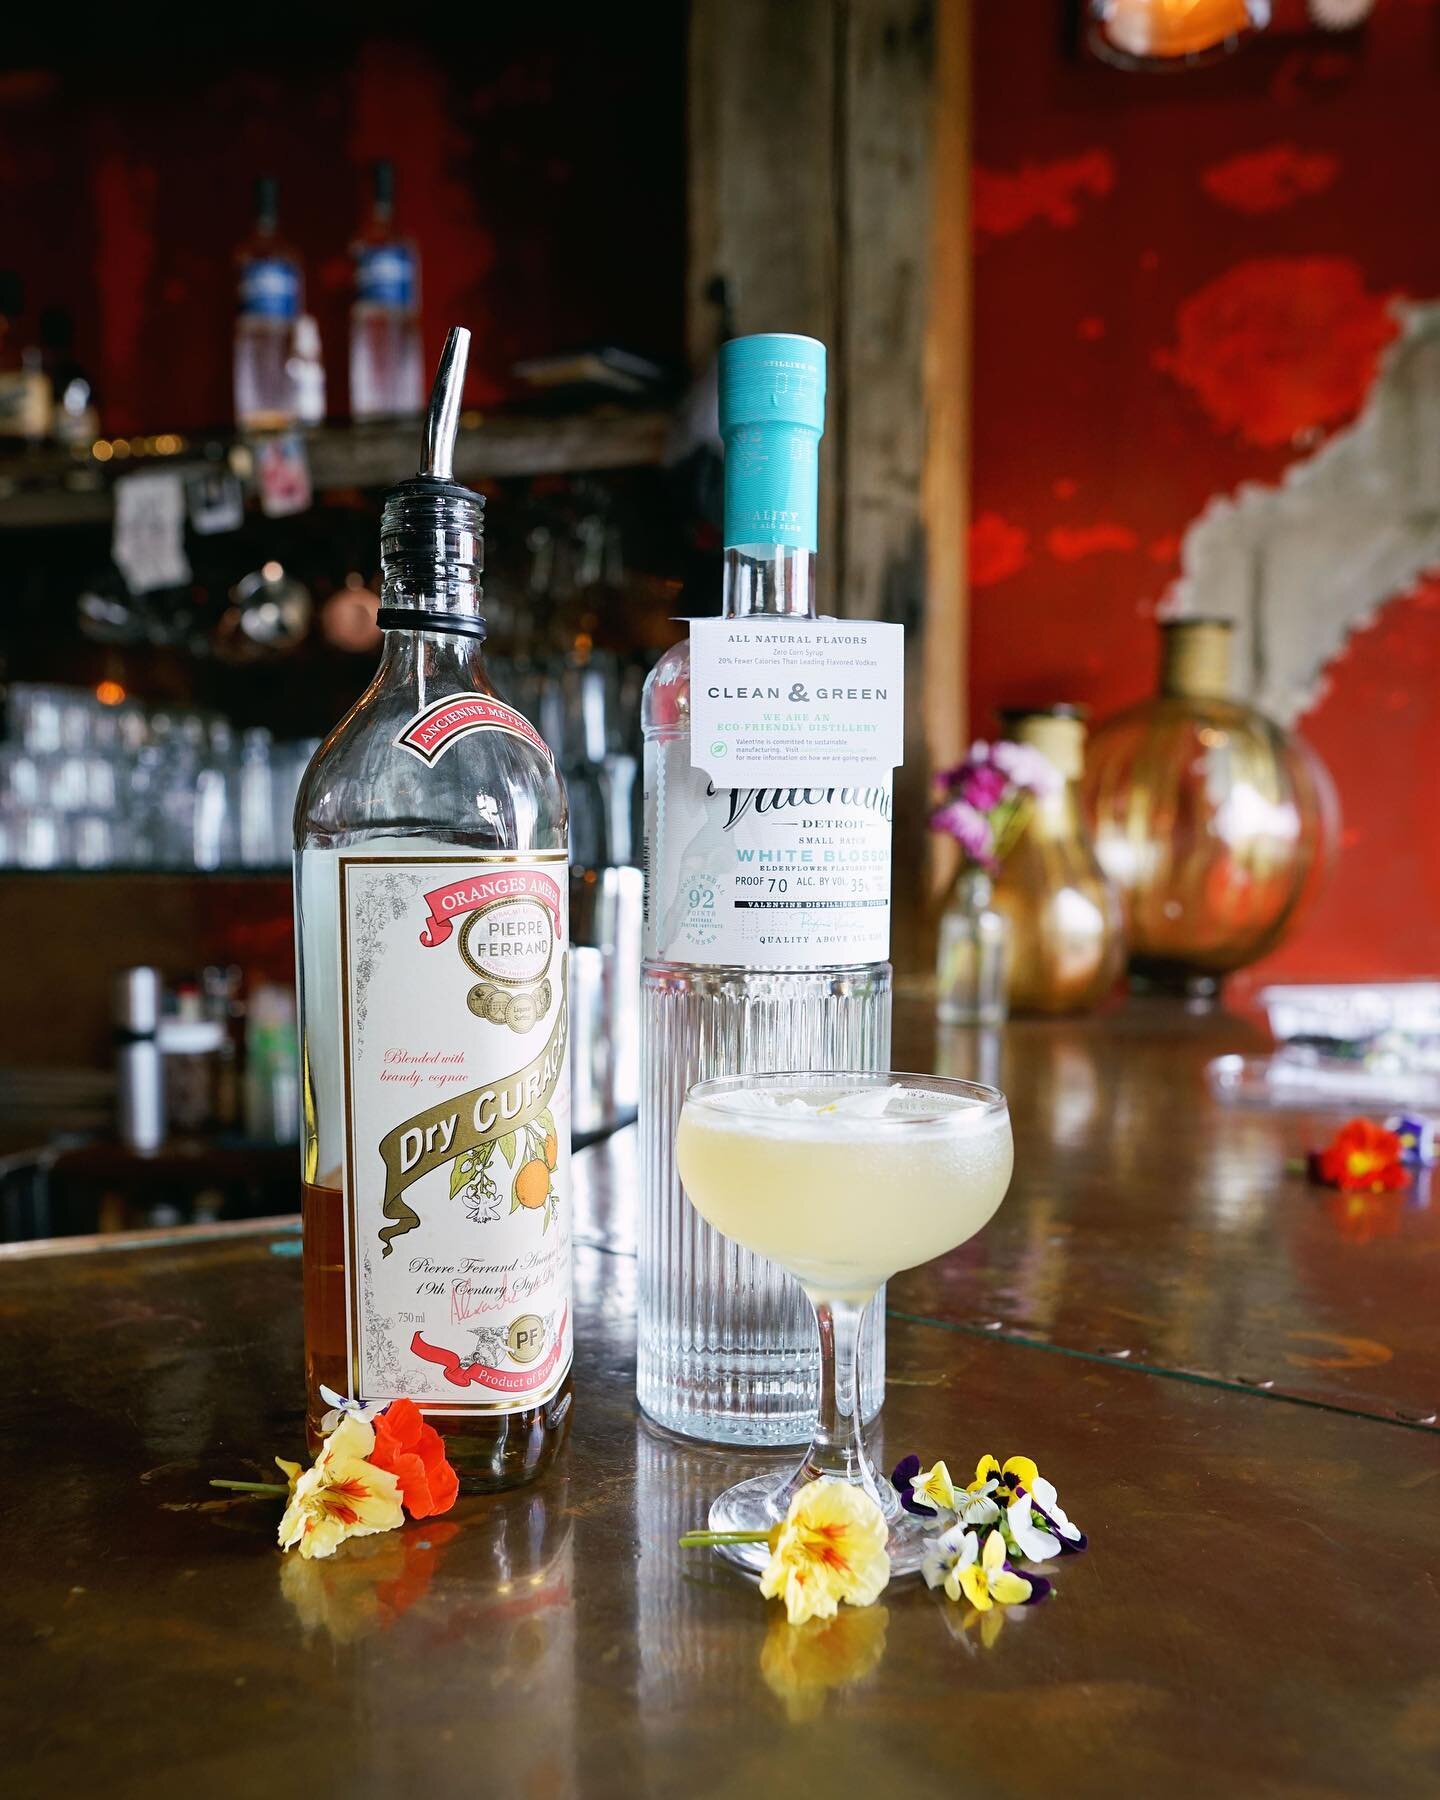 Stop by our Cocktail Lounge and try a Maiden's Muse 🌼⠀
Our lounge is now open 7 days a week!⠀
.⠀
.⠀
.⠀
#valentinedistilling #valentinevodka #cleanandgreen #regionalmanufacturing #cocktailhour #cocktails #detroit #madeindetroit #drinkstagram #instadr